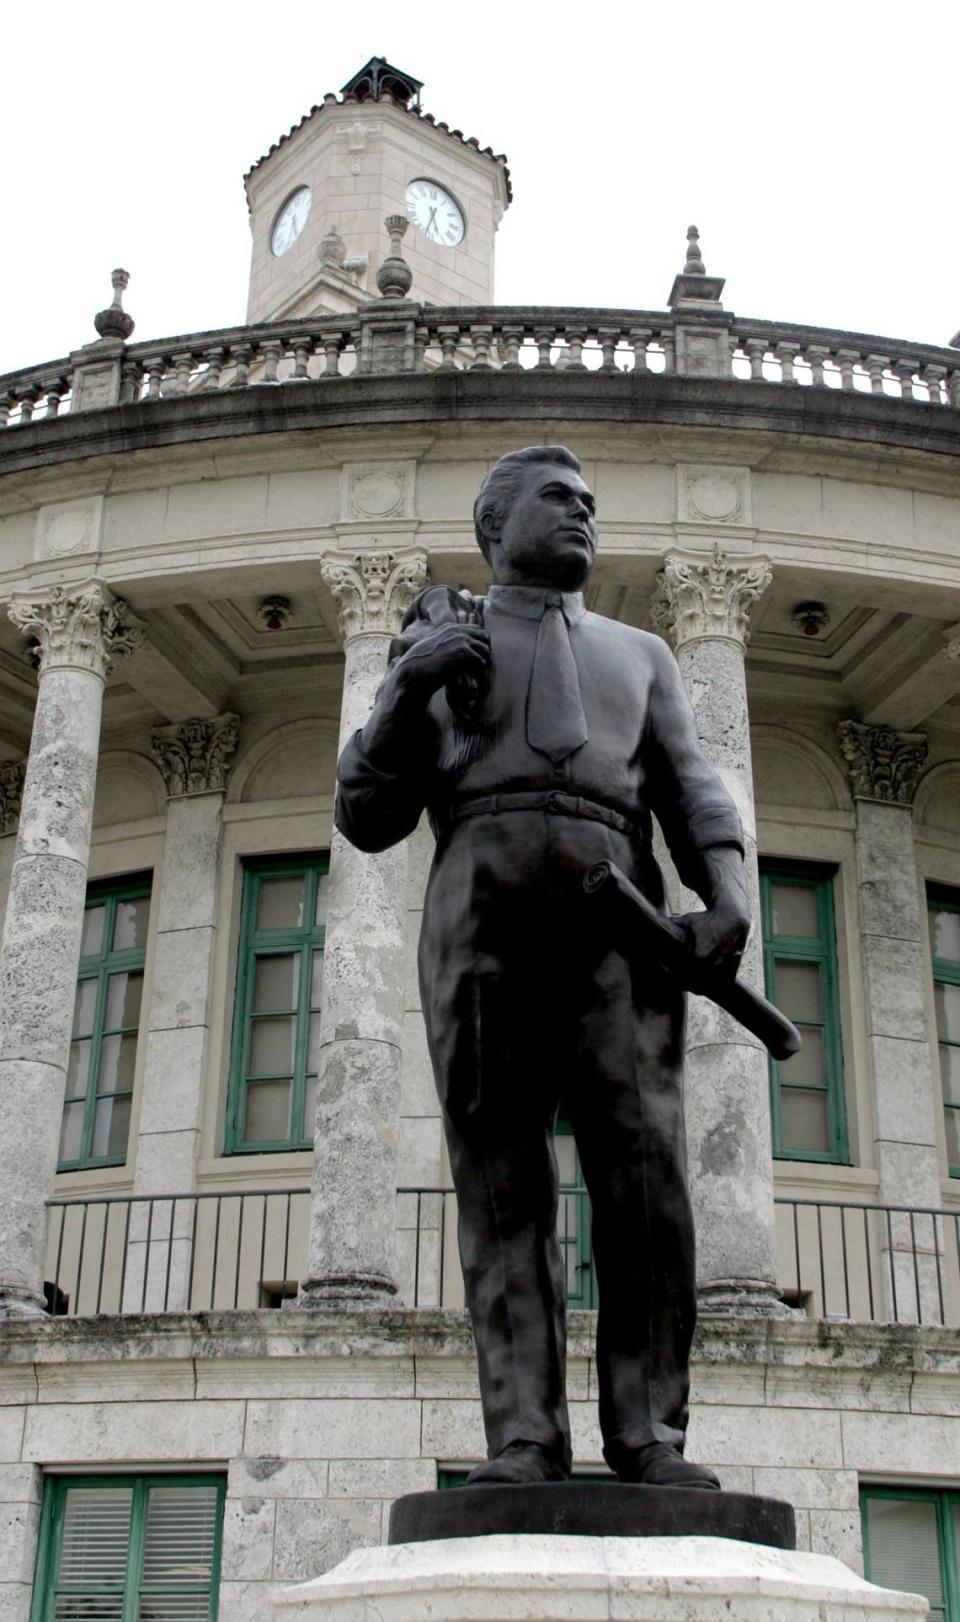 The new George Merrick statue by sculptor William Beckwith was unveiled in May of 2006 at Coral Gables City Hall.